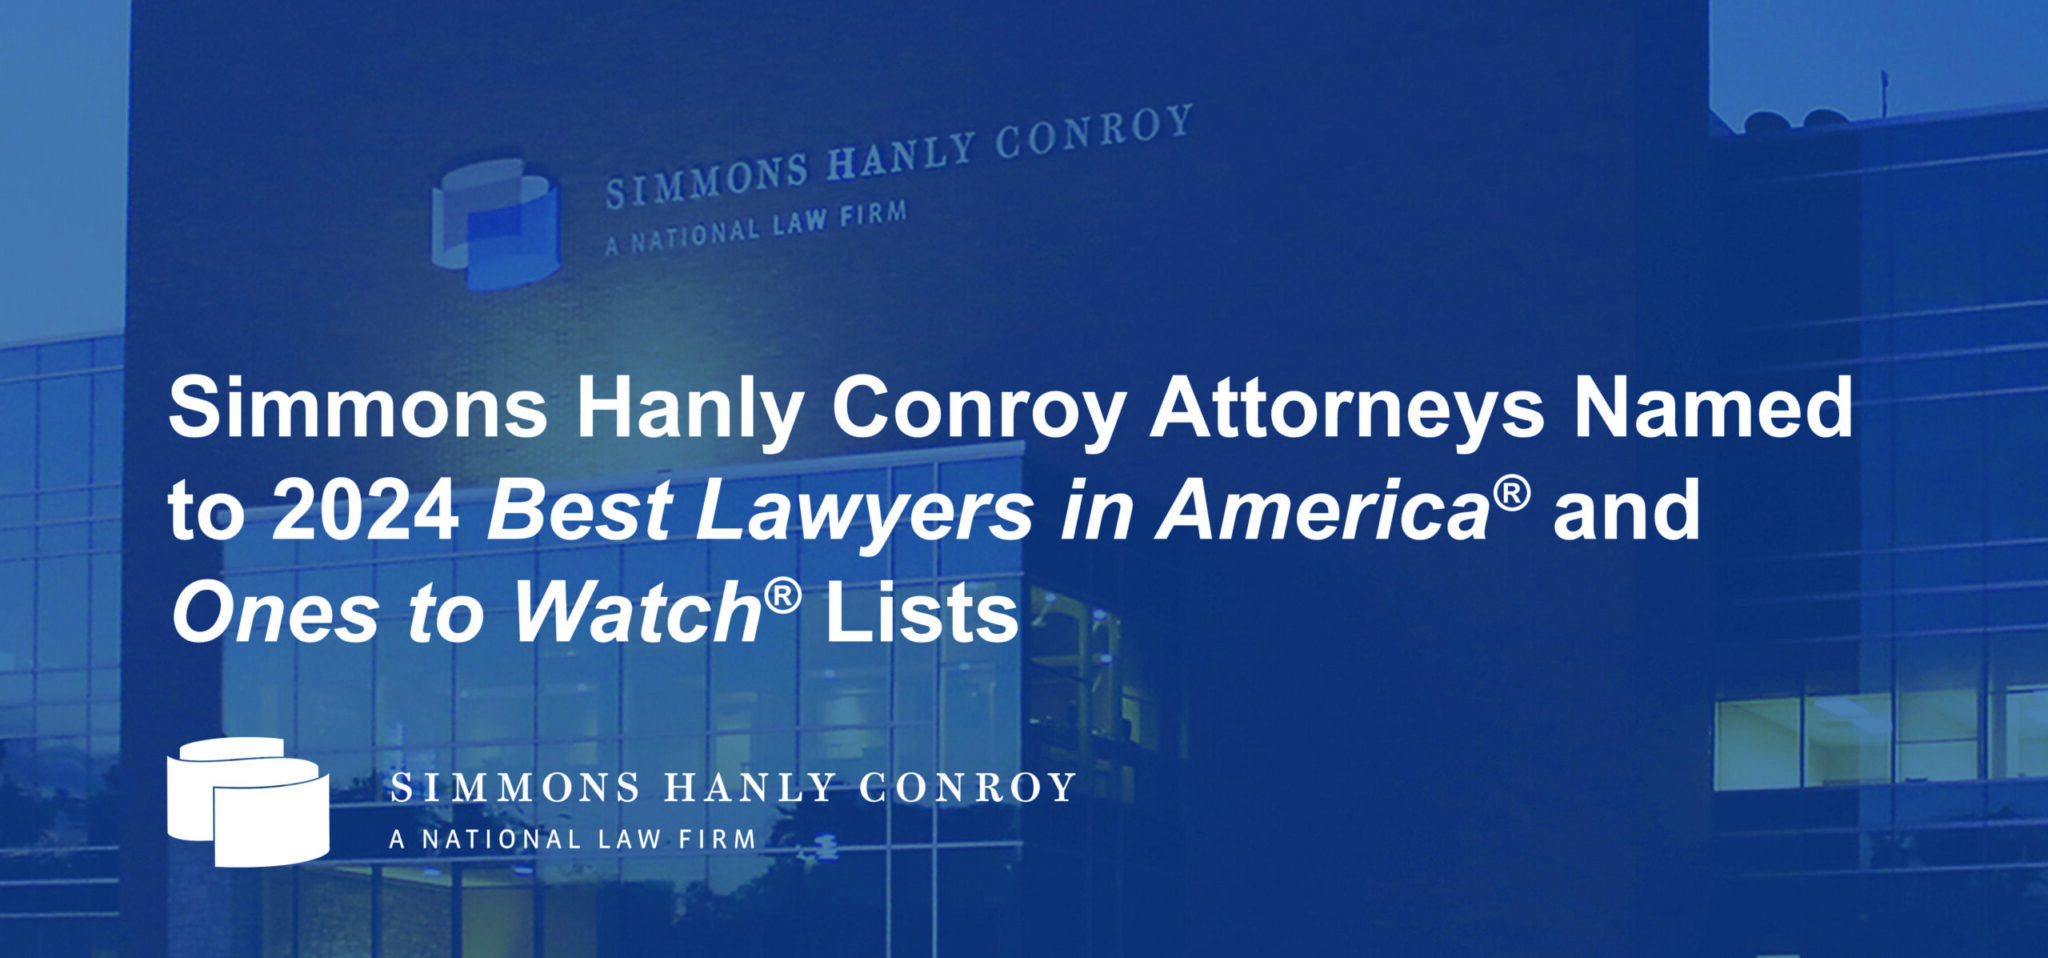 Simmons Hanly Conroy attorneys name Best Lawyers in America 2024